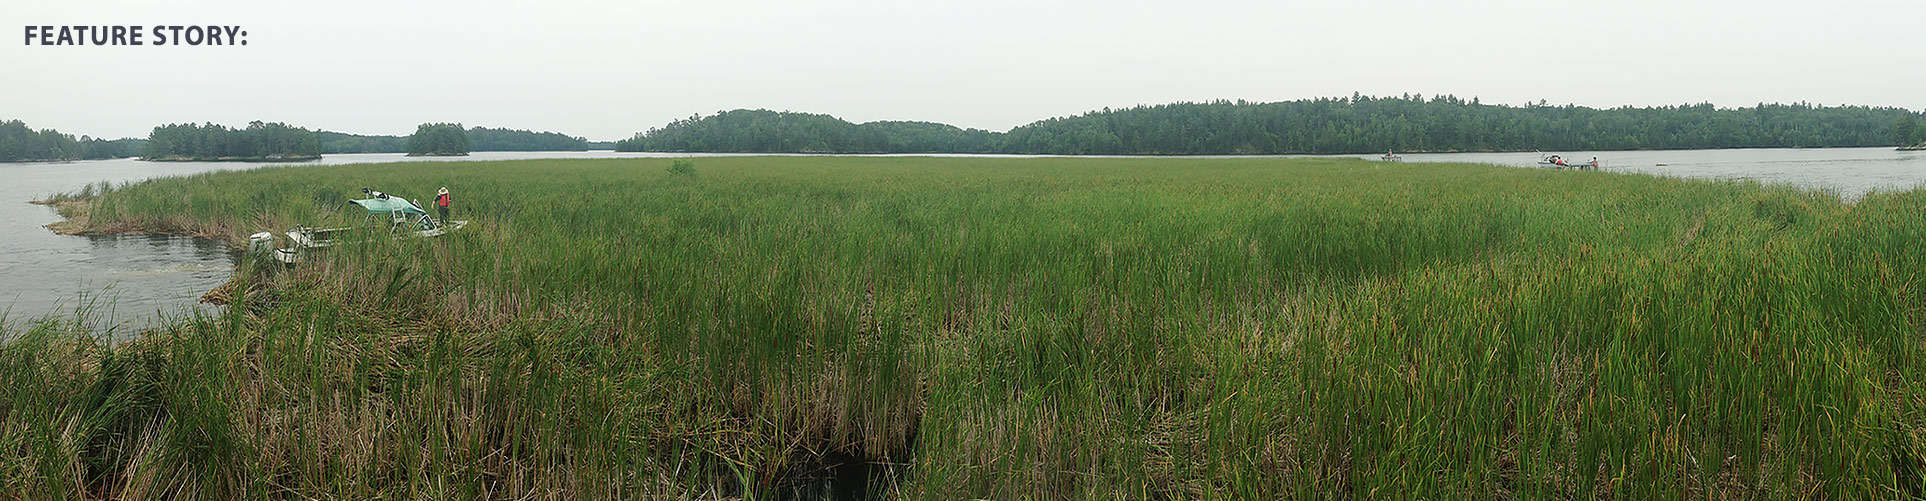 A large mass of floating cattails in Voyageurs National Park. Park biologists are developing new policies to deal with these "islands" and restore native wetlands. Photo courtesy Voyageurs National Park.